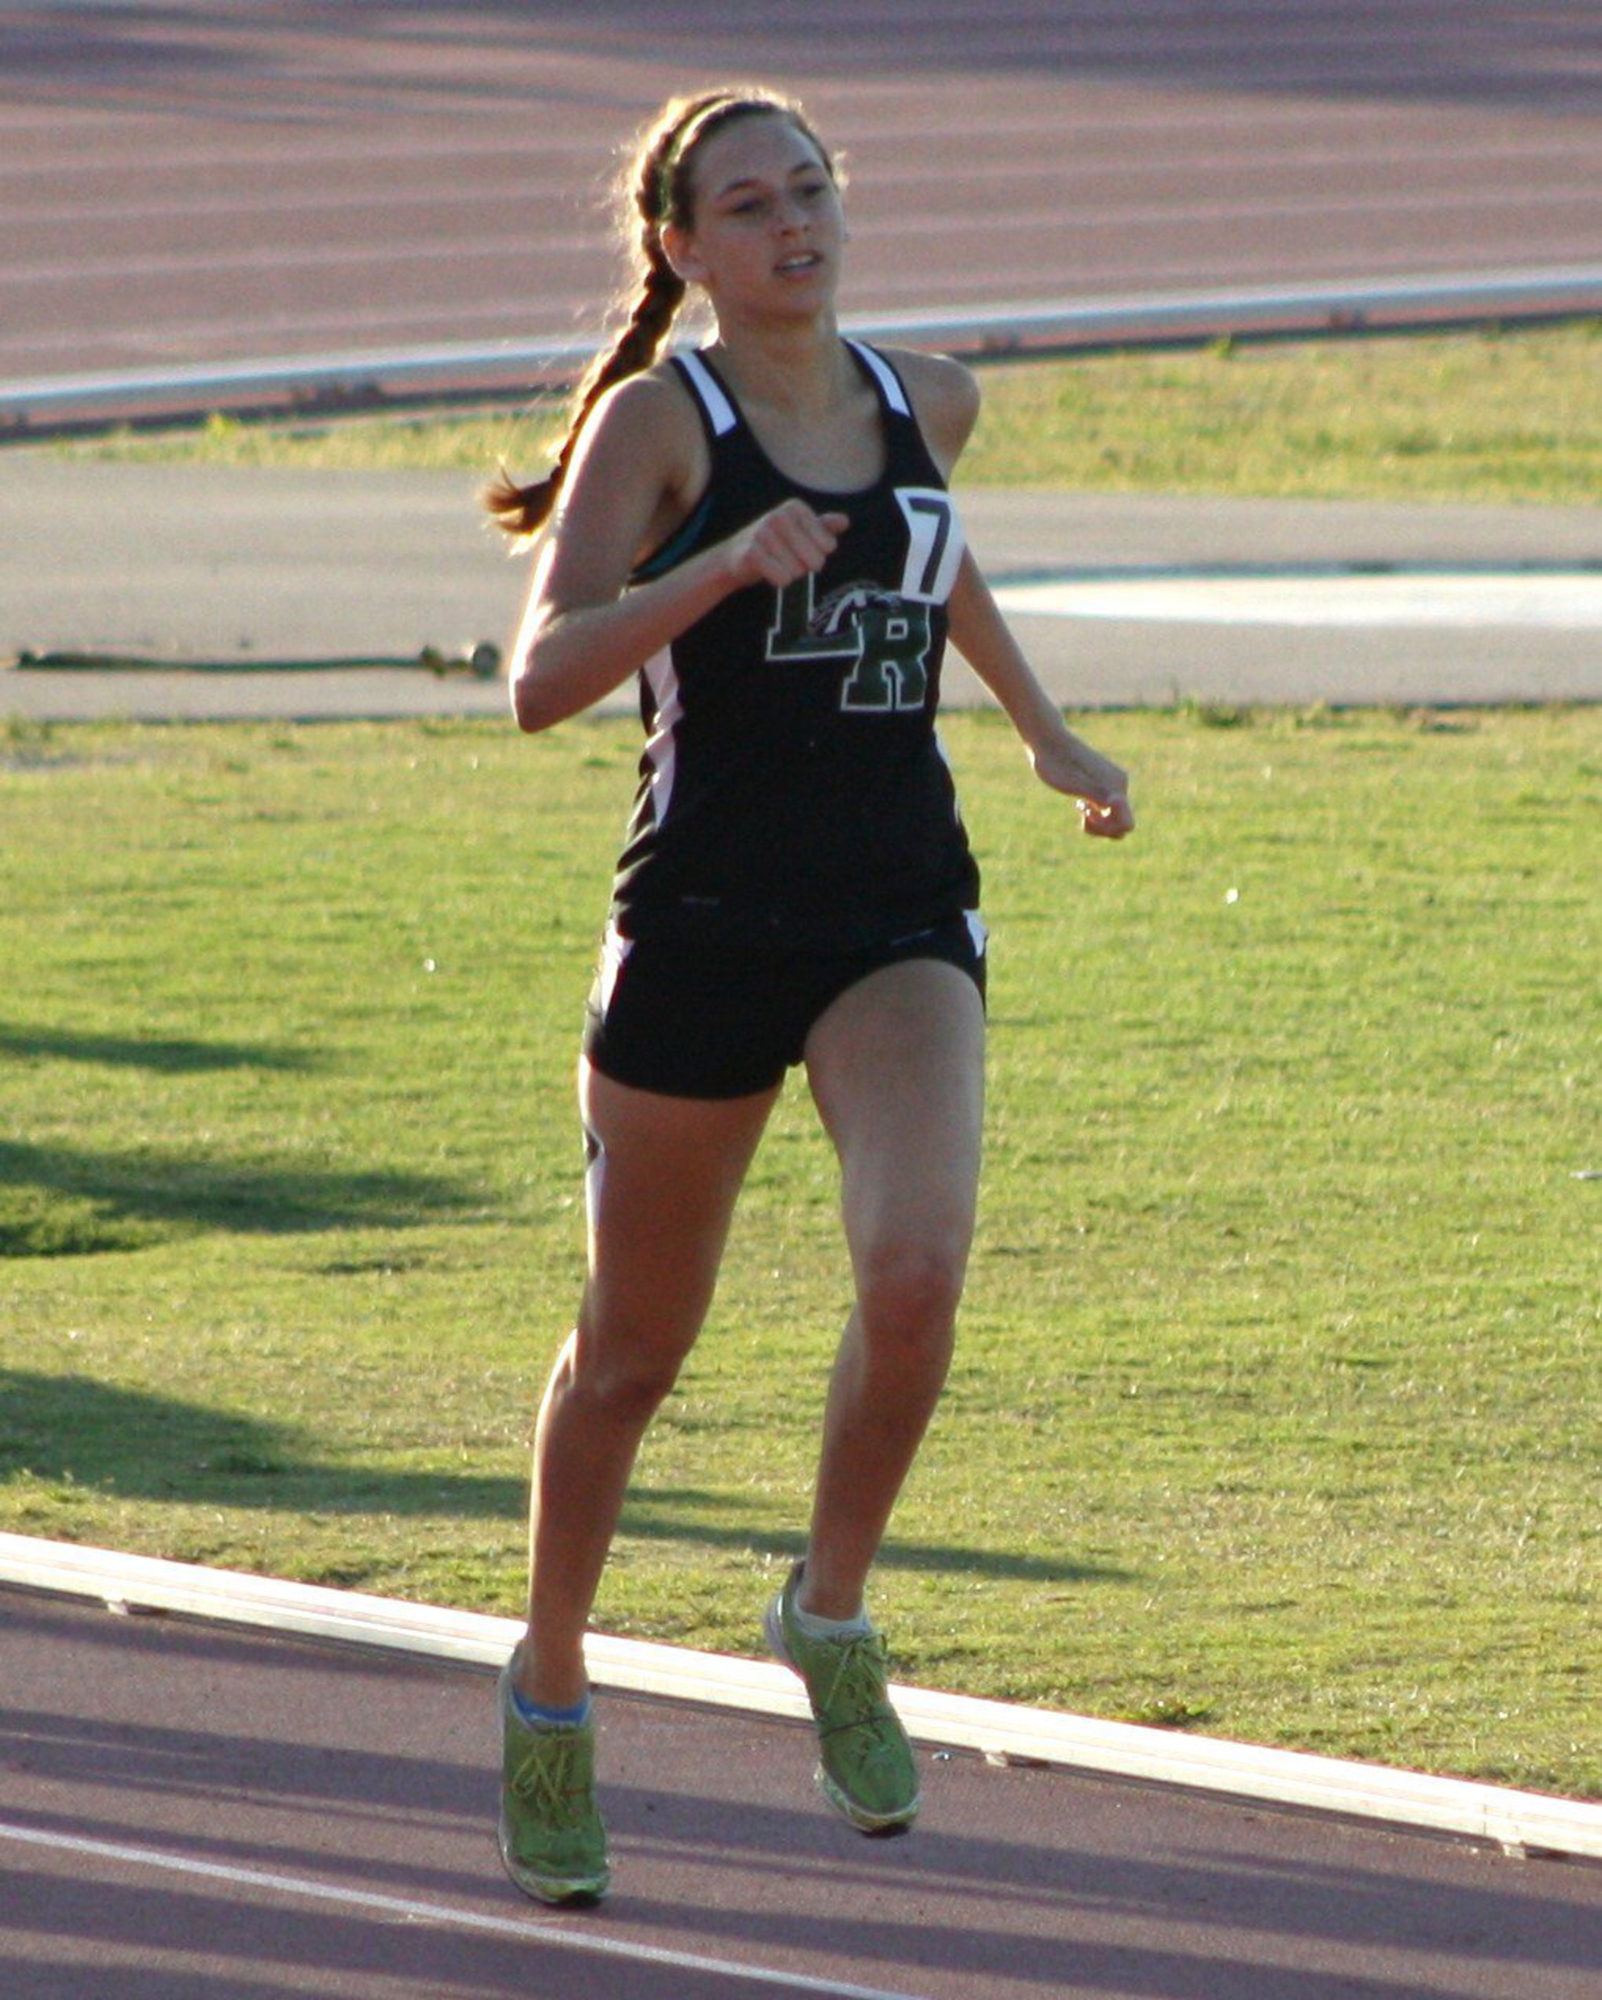 Kristin Wikstrom won the 800-meter run at the 2013 state track and field championships (2:16.45) for Lakewood Ranch High. Wikstrom is now the school's cross country and track and field coach. Courtesy photo.